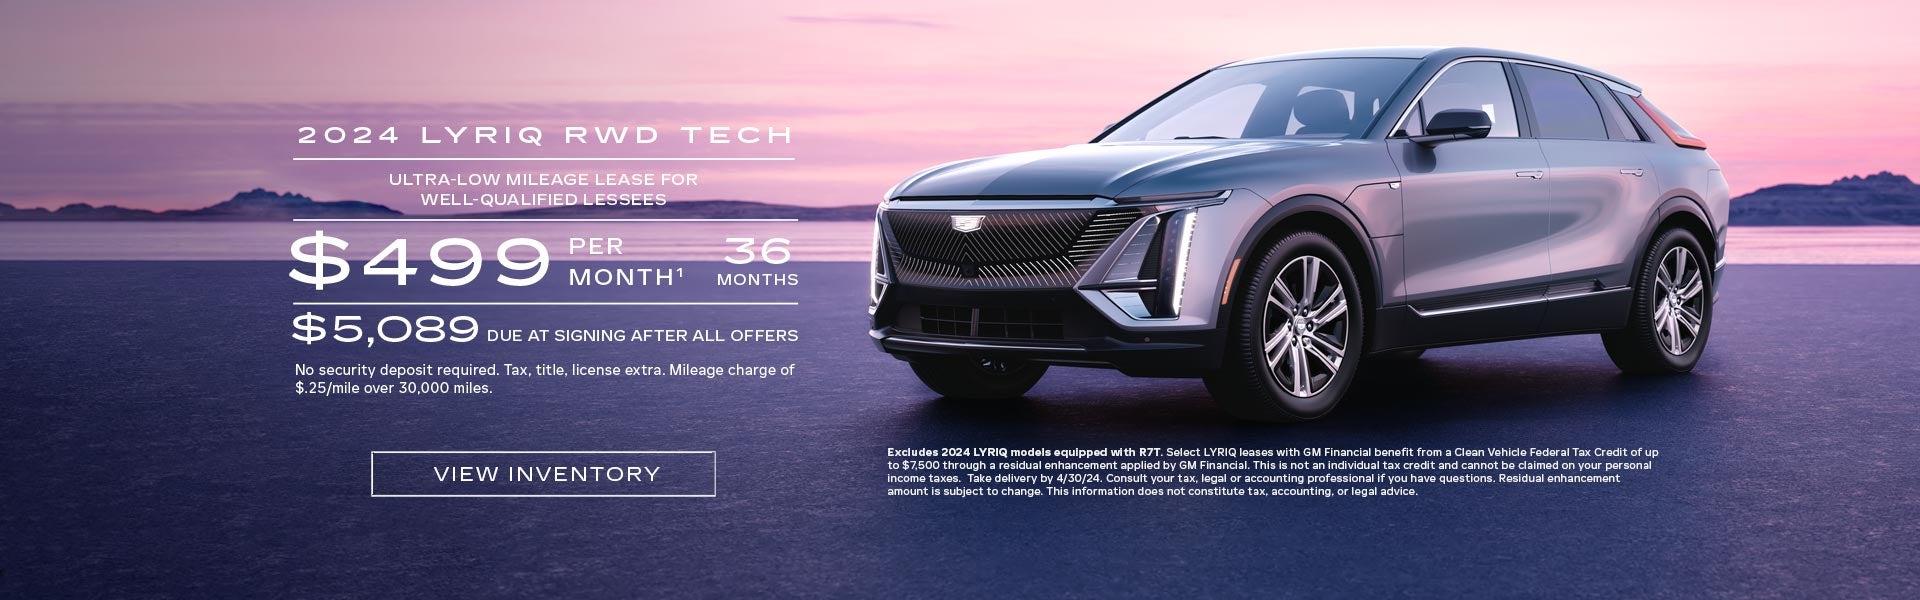 2024 LYRIQ RWD TECH. Ultra-low milege lease for well-qualified lessees. $499 per month for 36 mon...